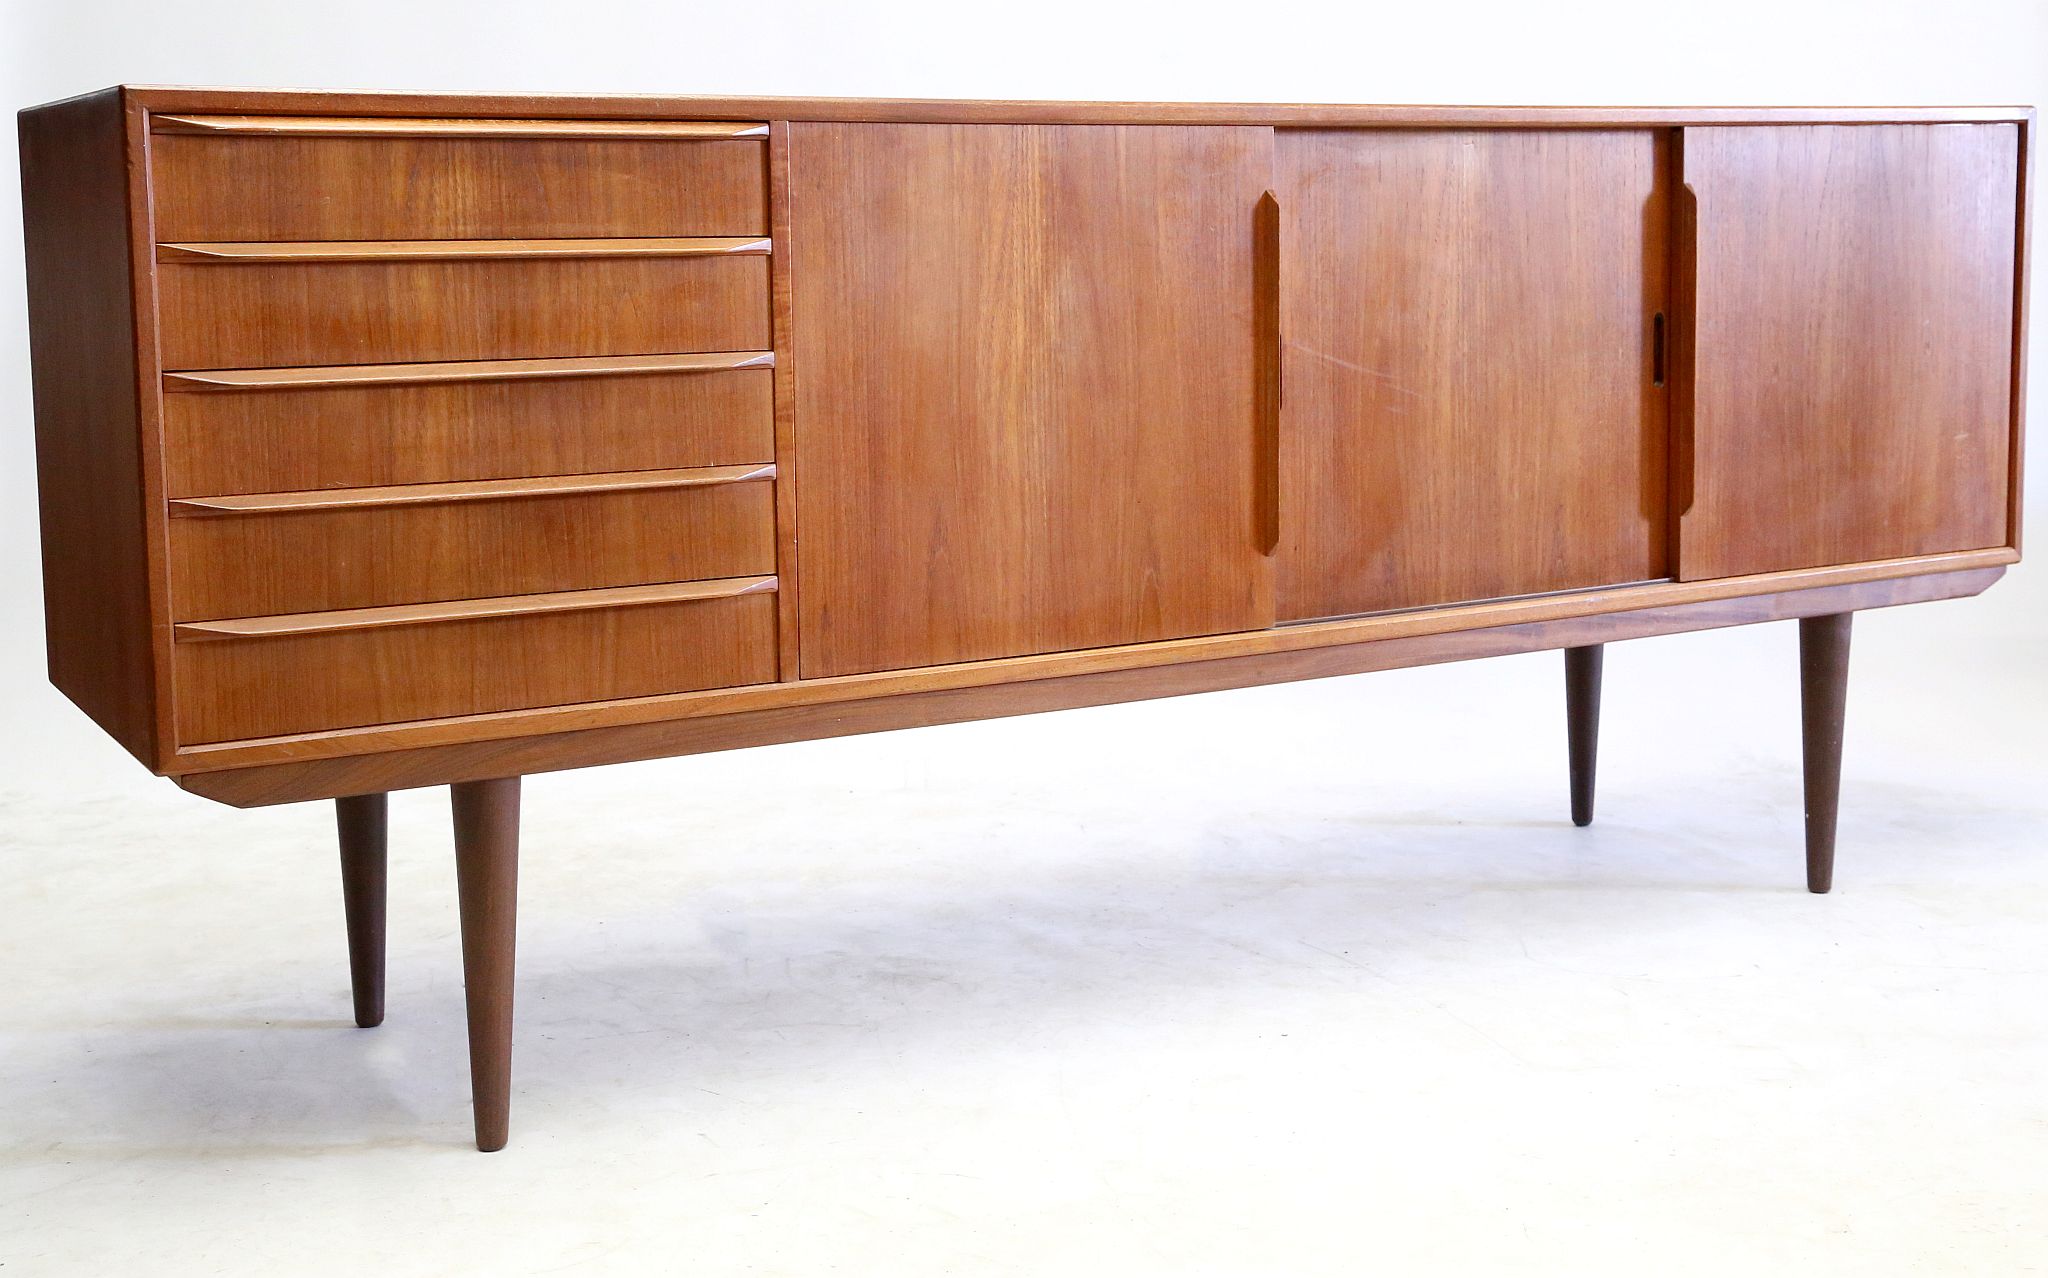 A DANISH 1960s TEAK SIDEBOARD, attributed to Svend - Image 4 of 10